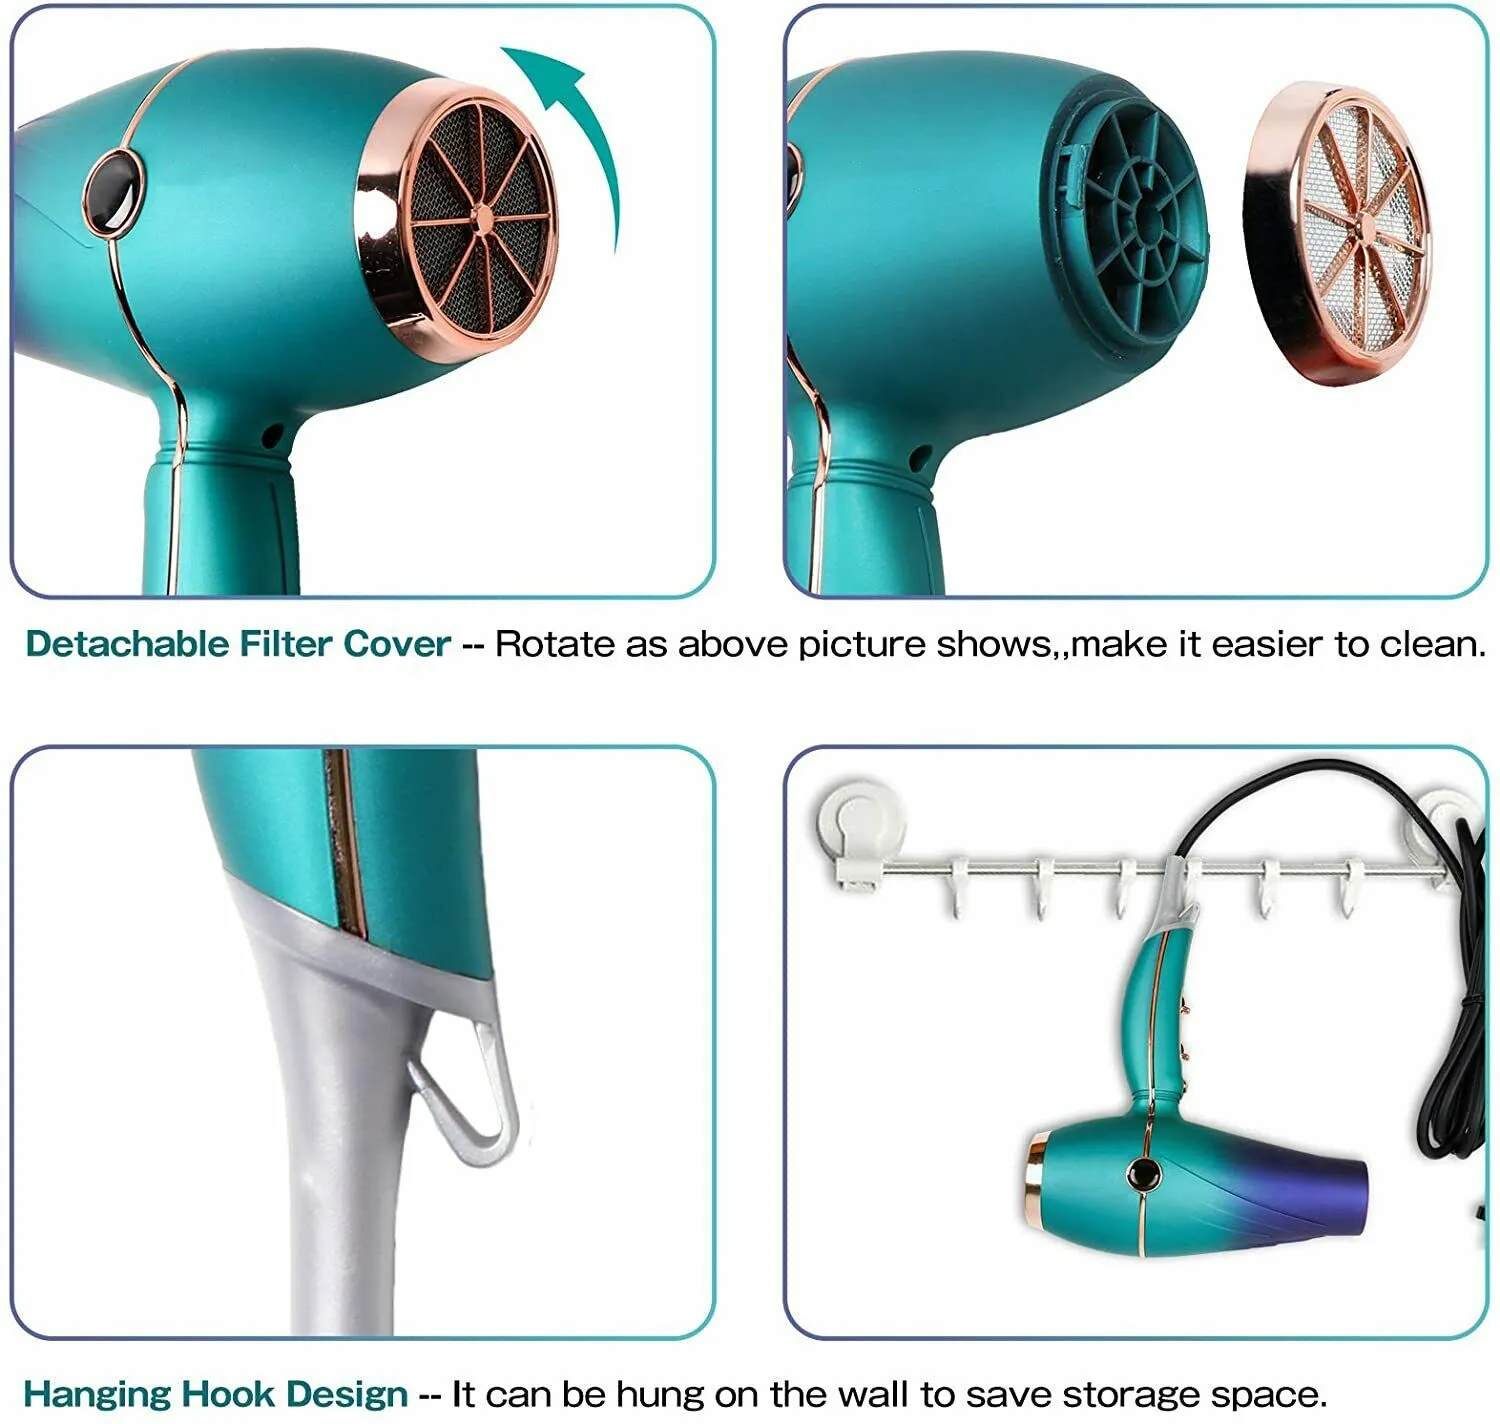 Professional Salon Hair Dryer 2300W Powerful AC Motor Home Use Blow Dryer Machine with Negative